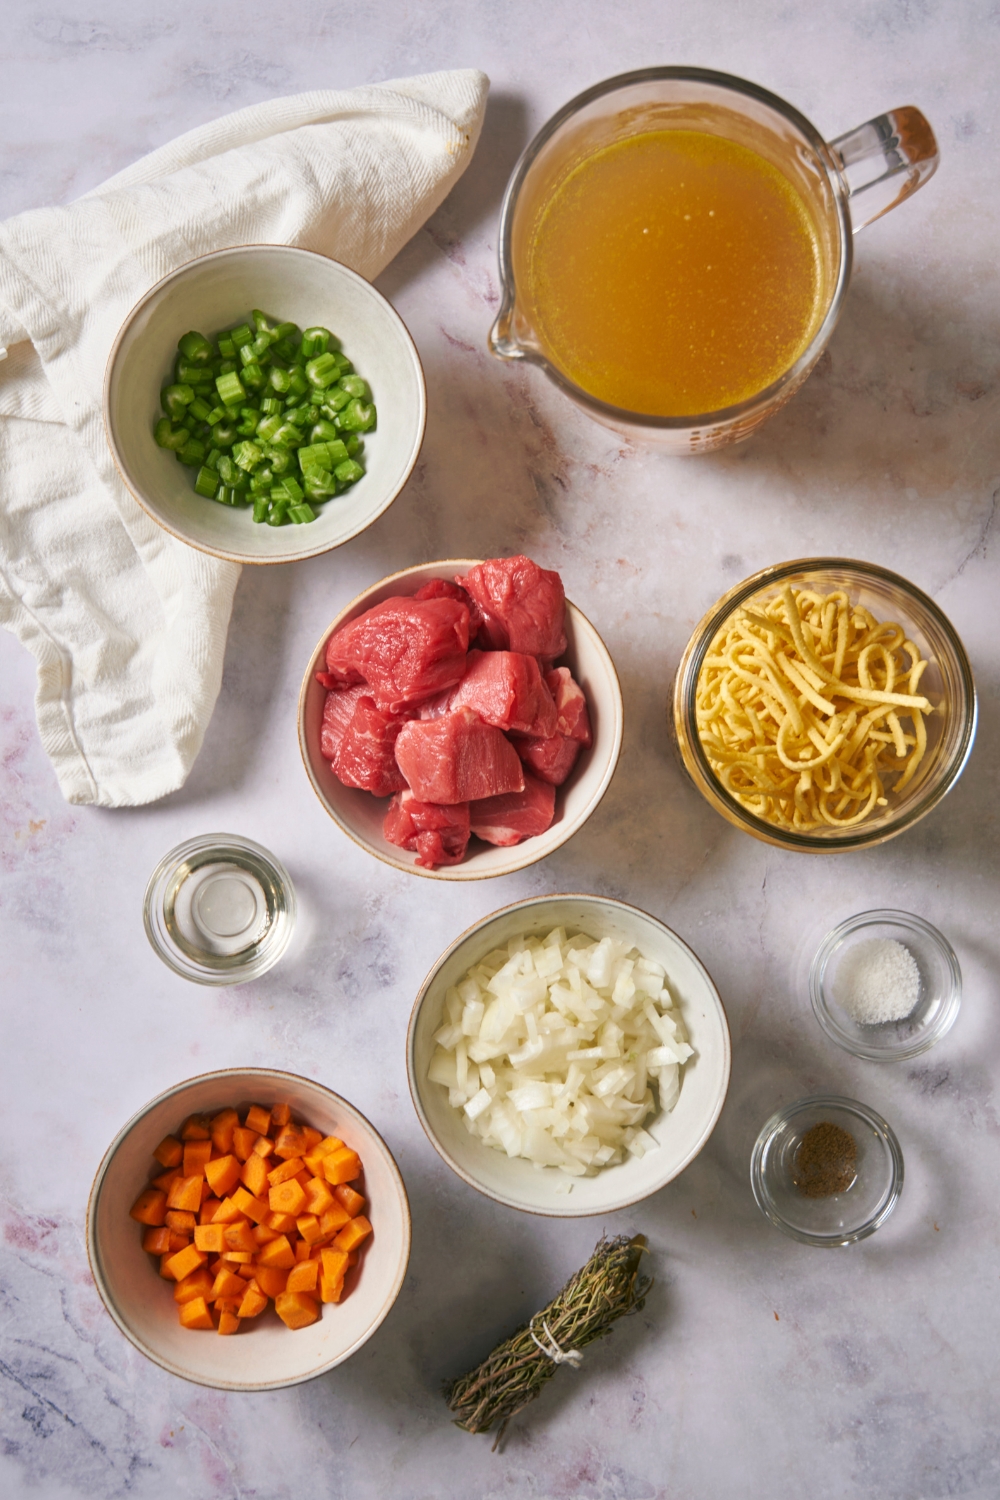 A bowl of broth, a bowl of diced green pepper, a bowl of beef cubes, a bowl of egg noodles, a bowl of onion, and a bowl of diced carrots.